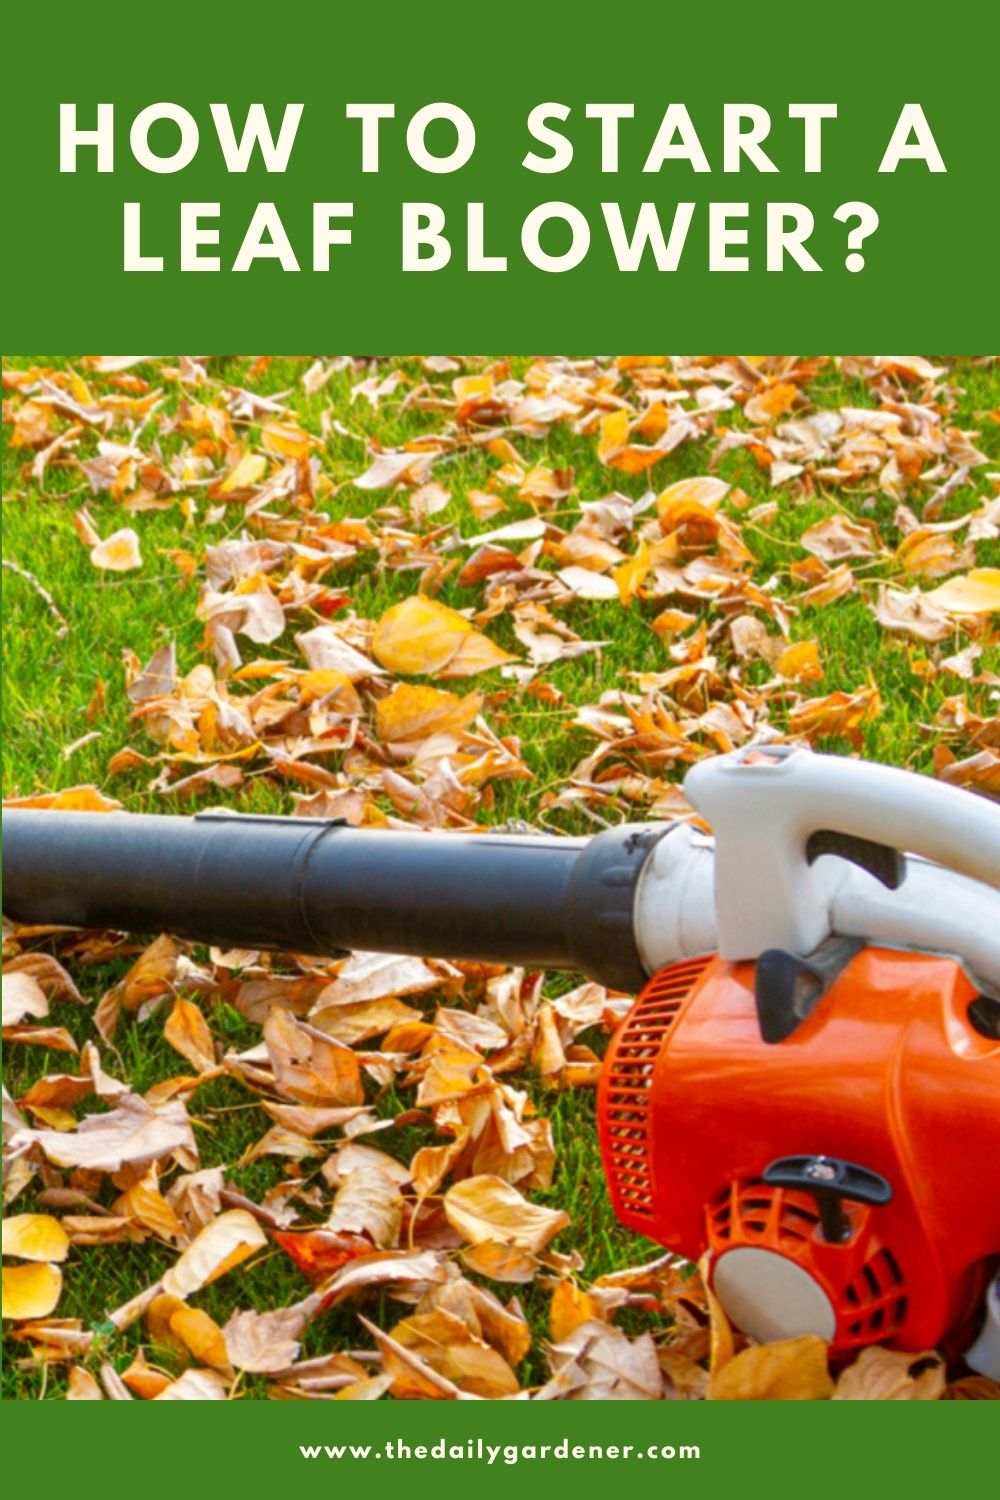 How to start the leaf blower 1